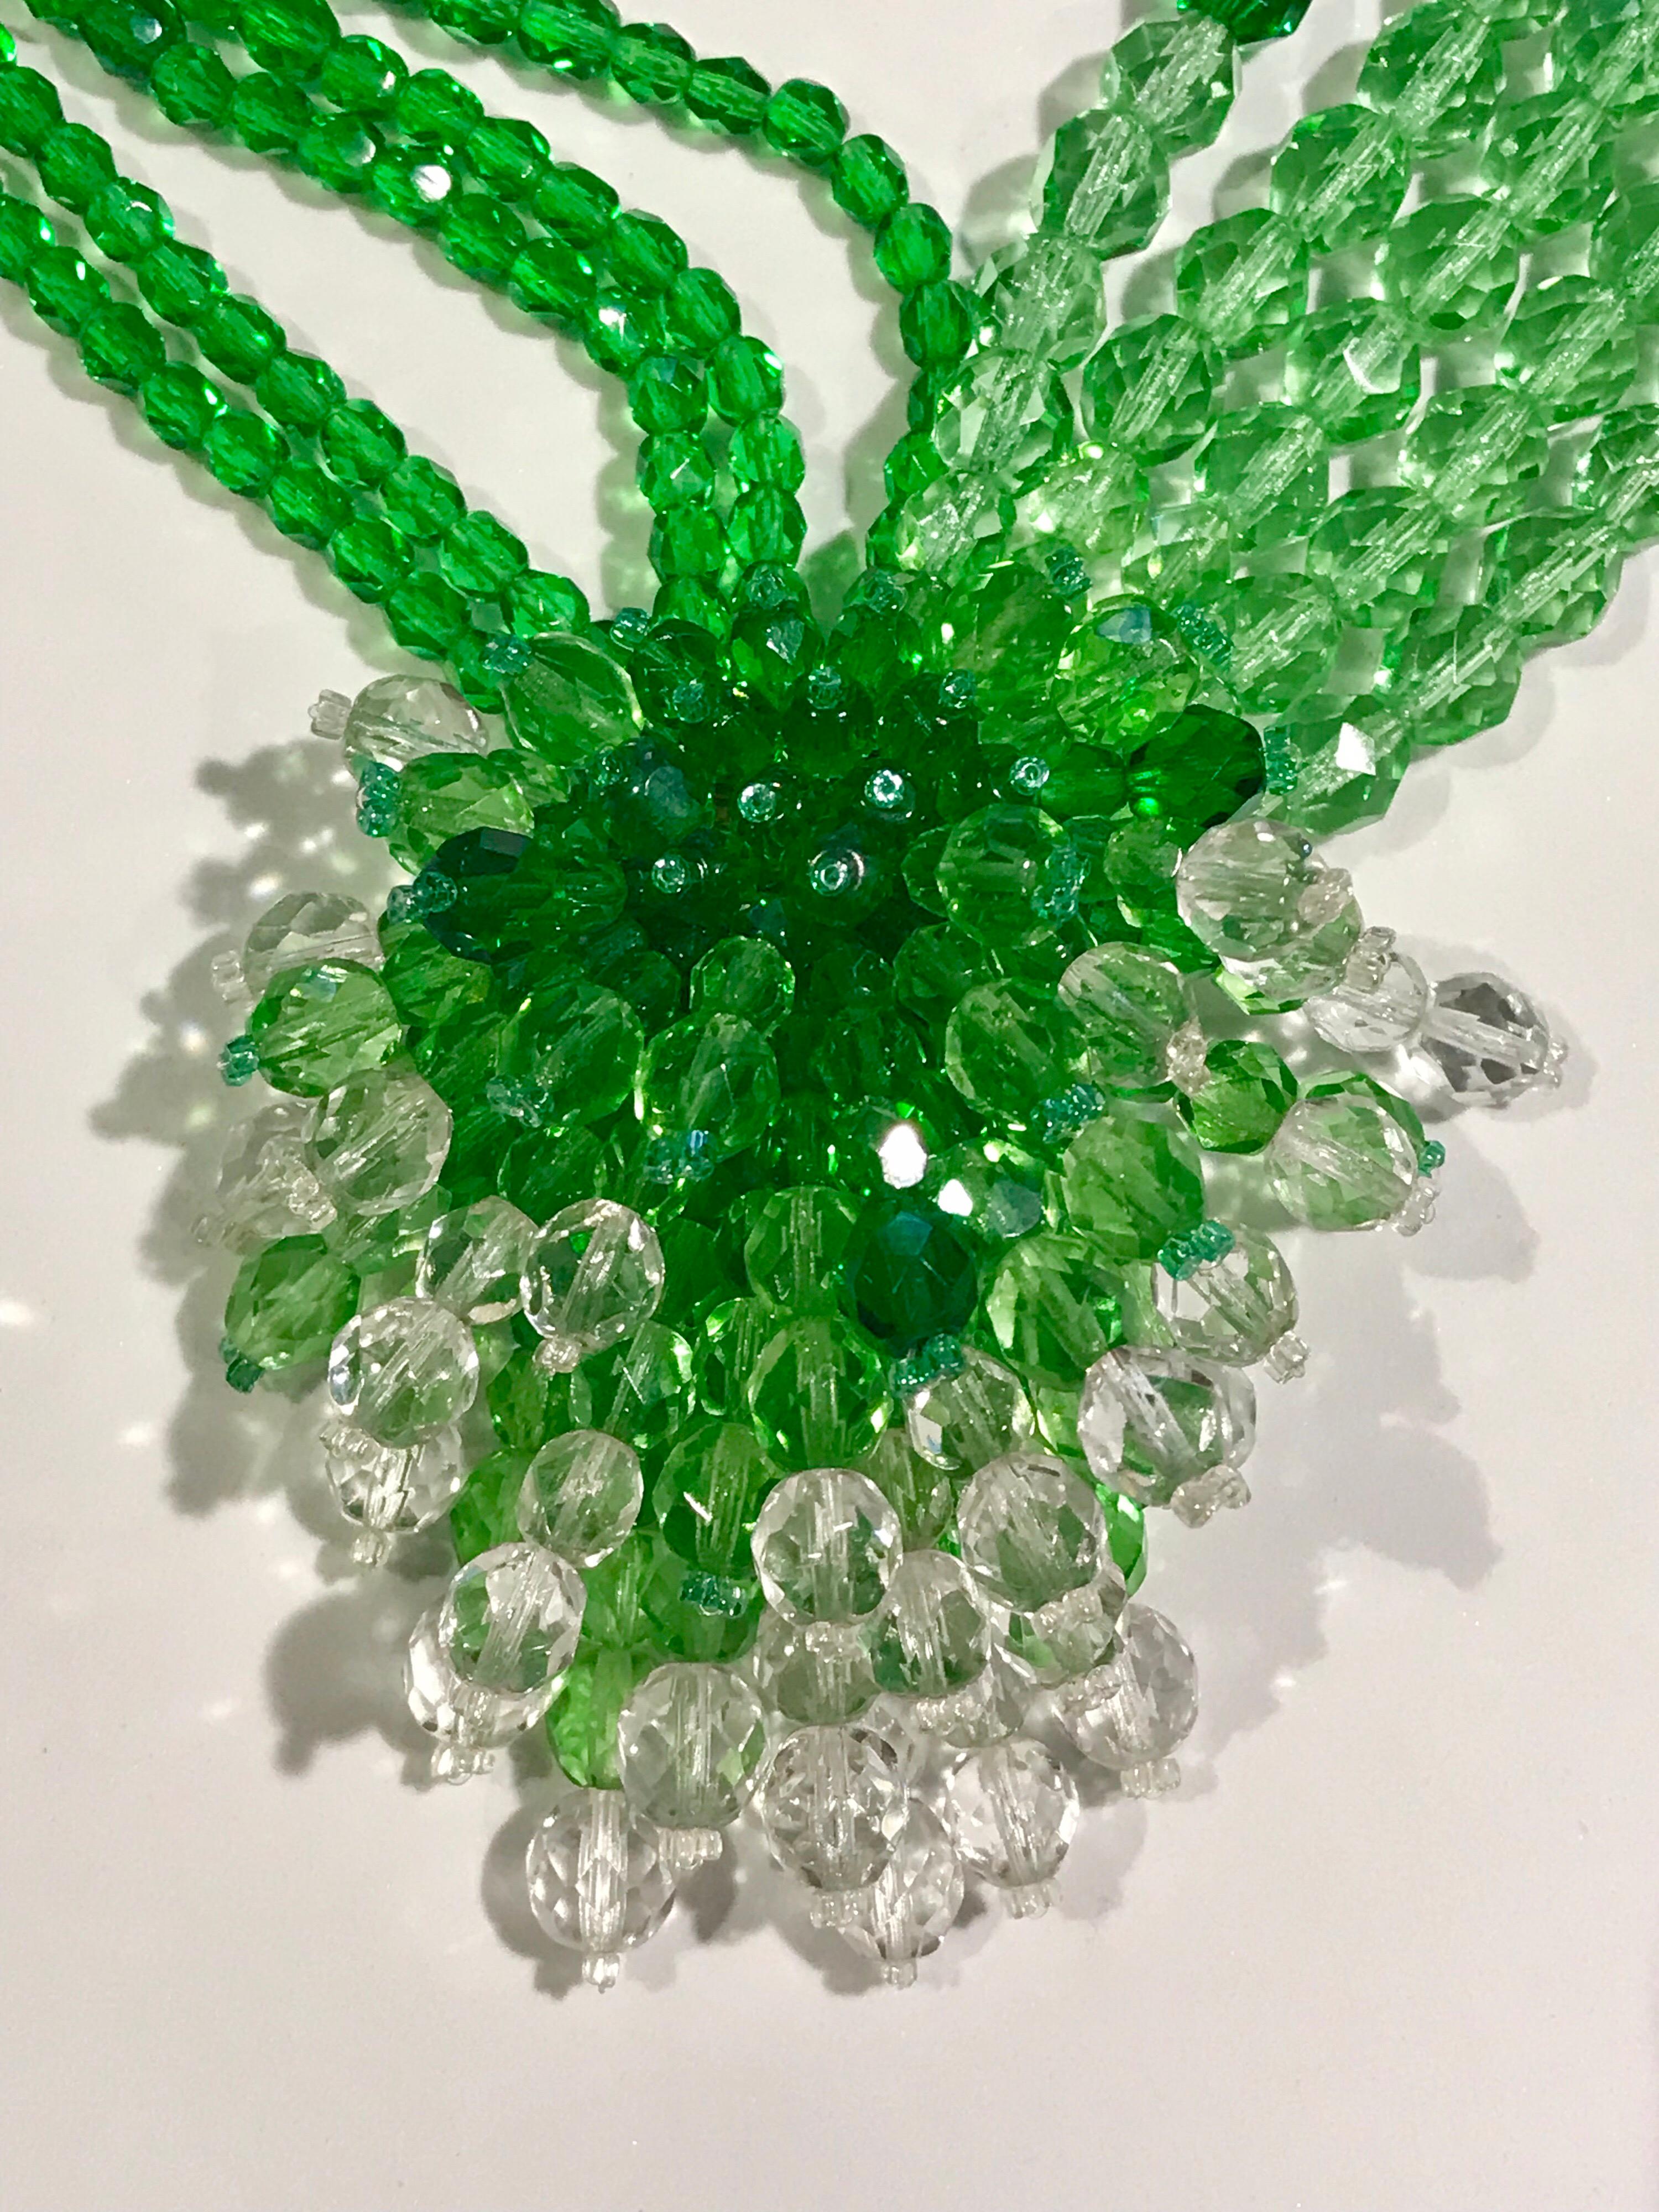 A beautiful 1950s crystal bead necklace by famous jewelry house Coppola e Toppo. Brother and sister team Bruno and Lyda Coppola began creating their famous style of jewelry in the 1940s and continued until 1986. They designed pieces for several